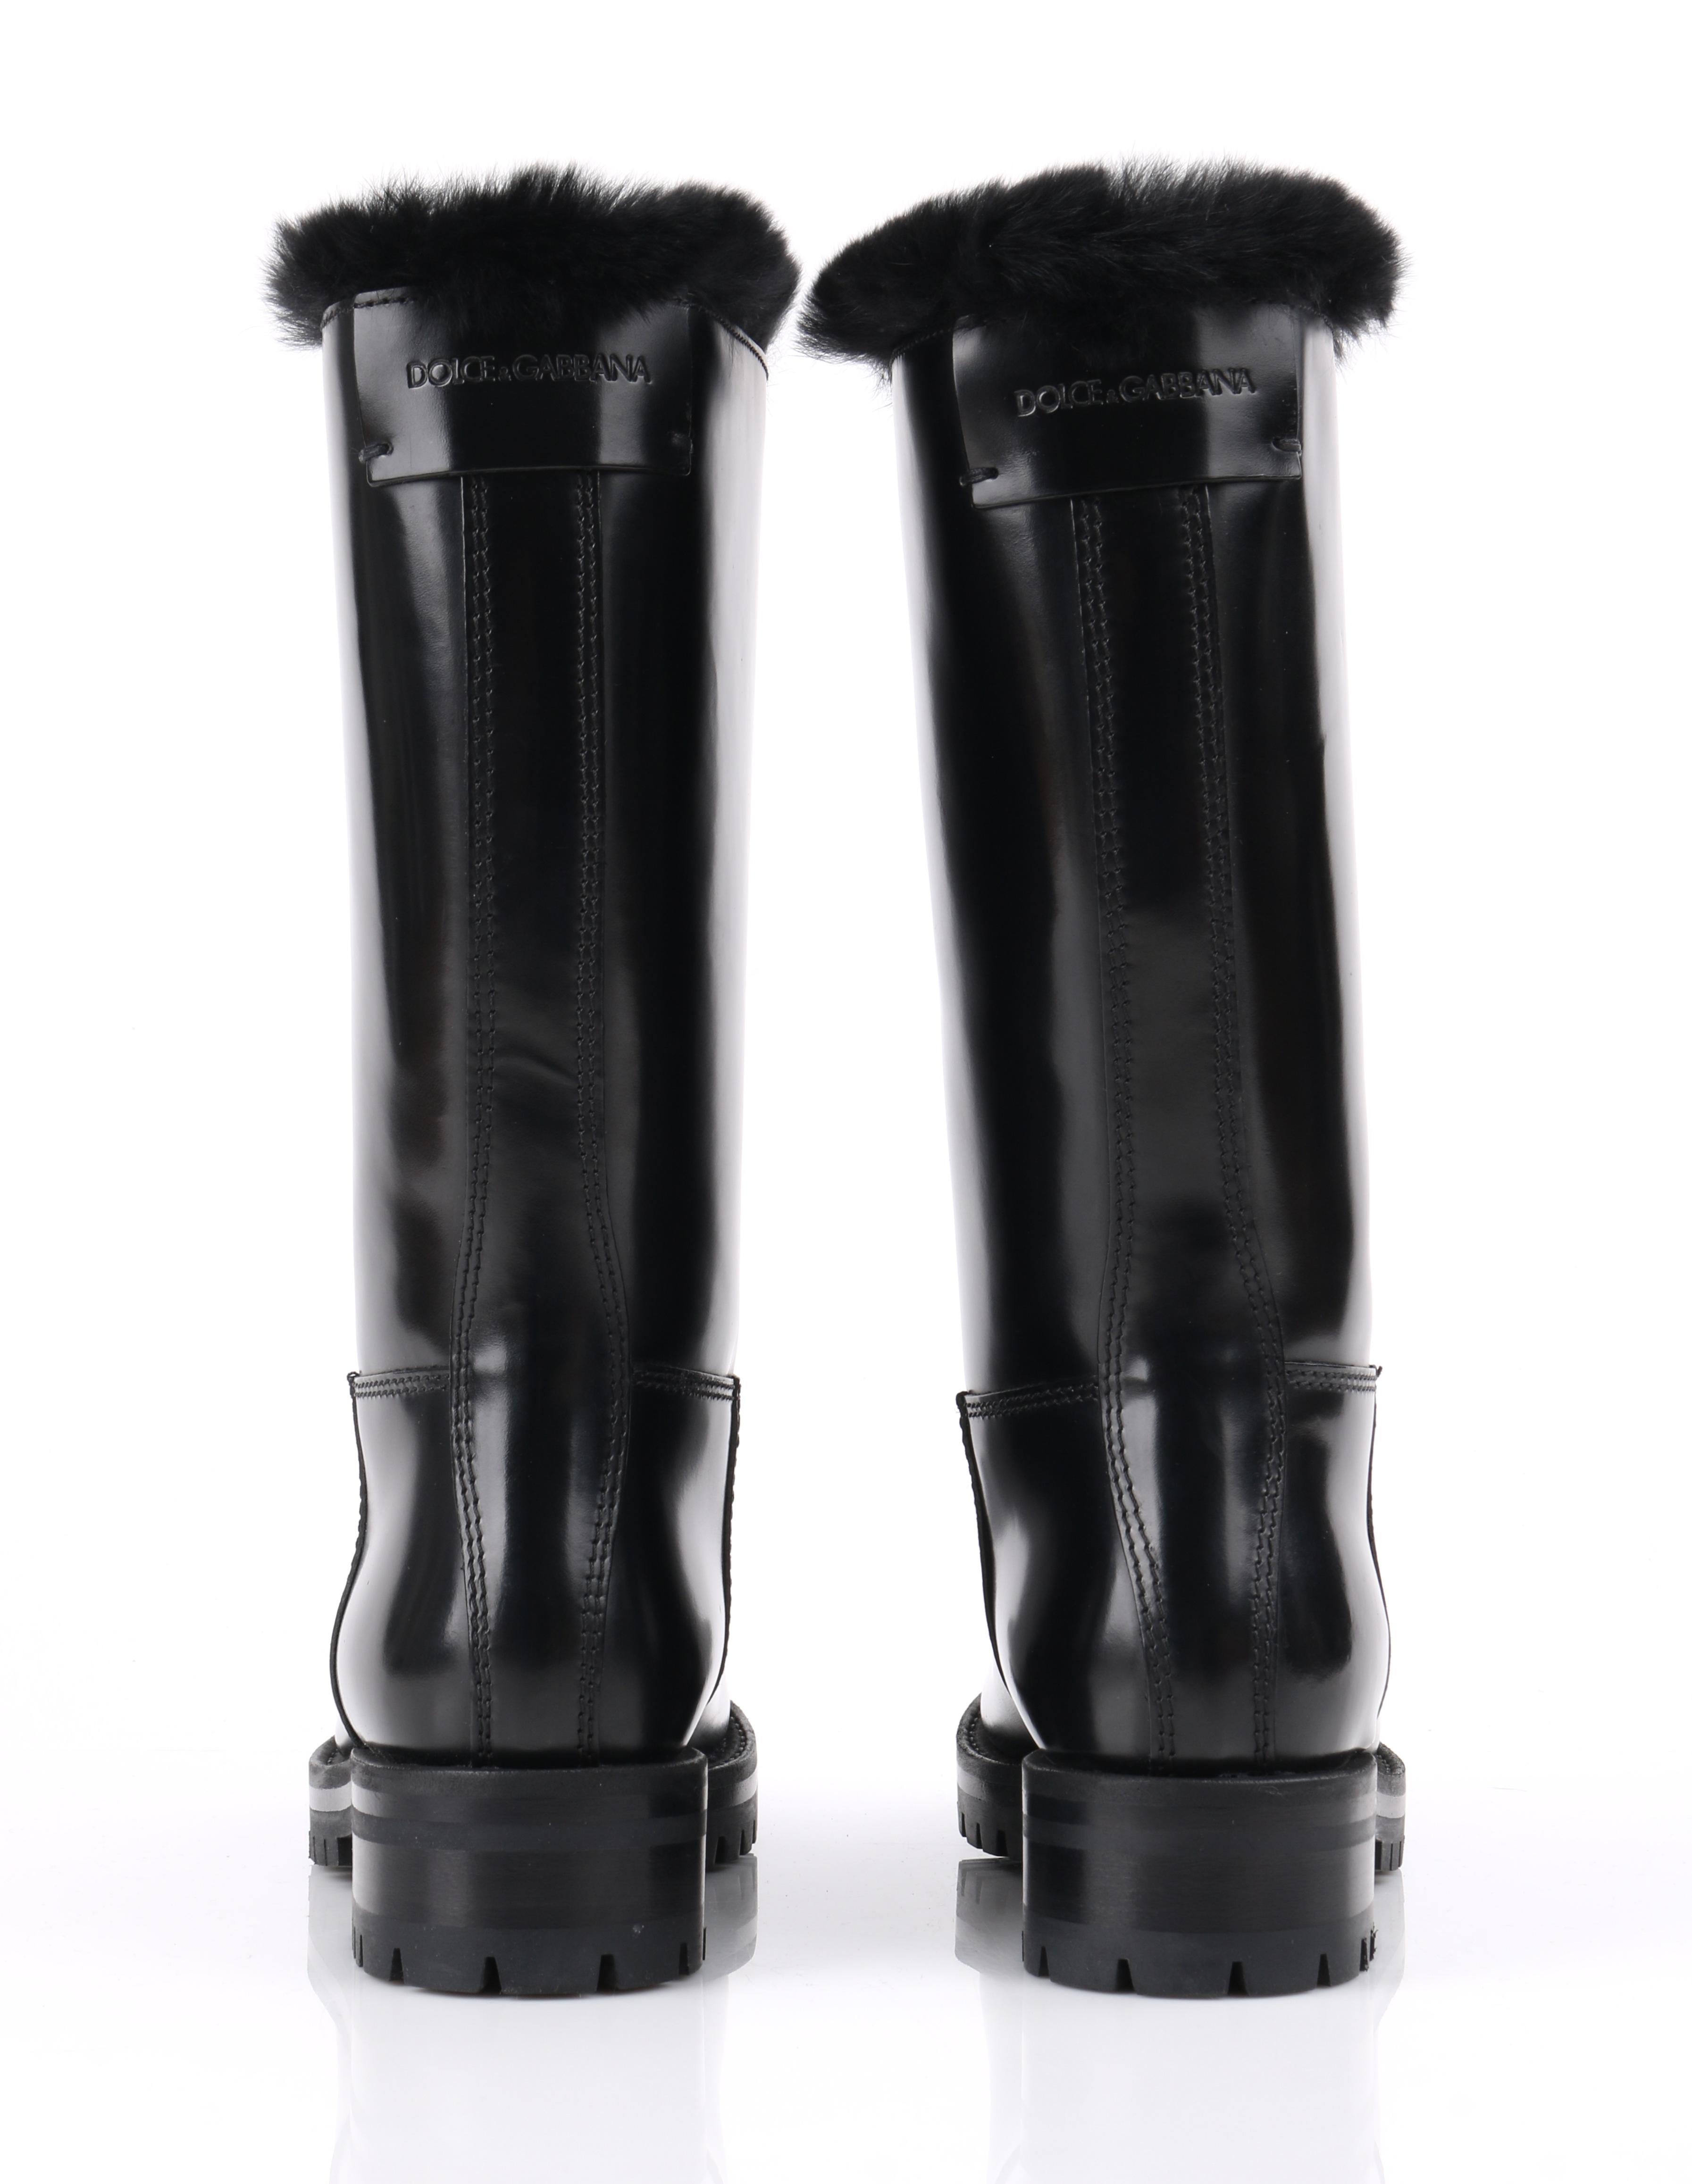 DOLCE & GABBANA Black Leather Lapin Fur Lined Calf High Moto Cold Weather Boots For Sale 1